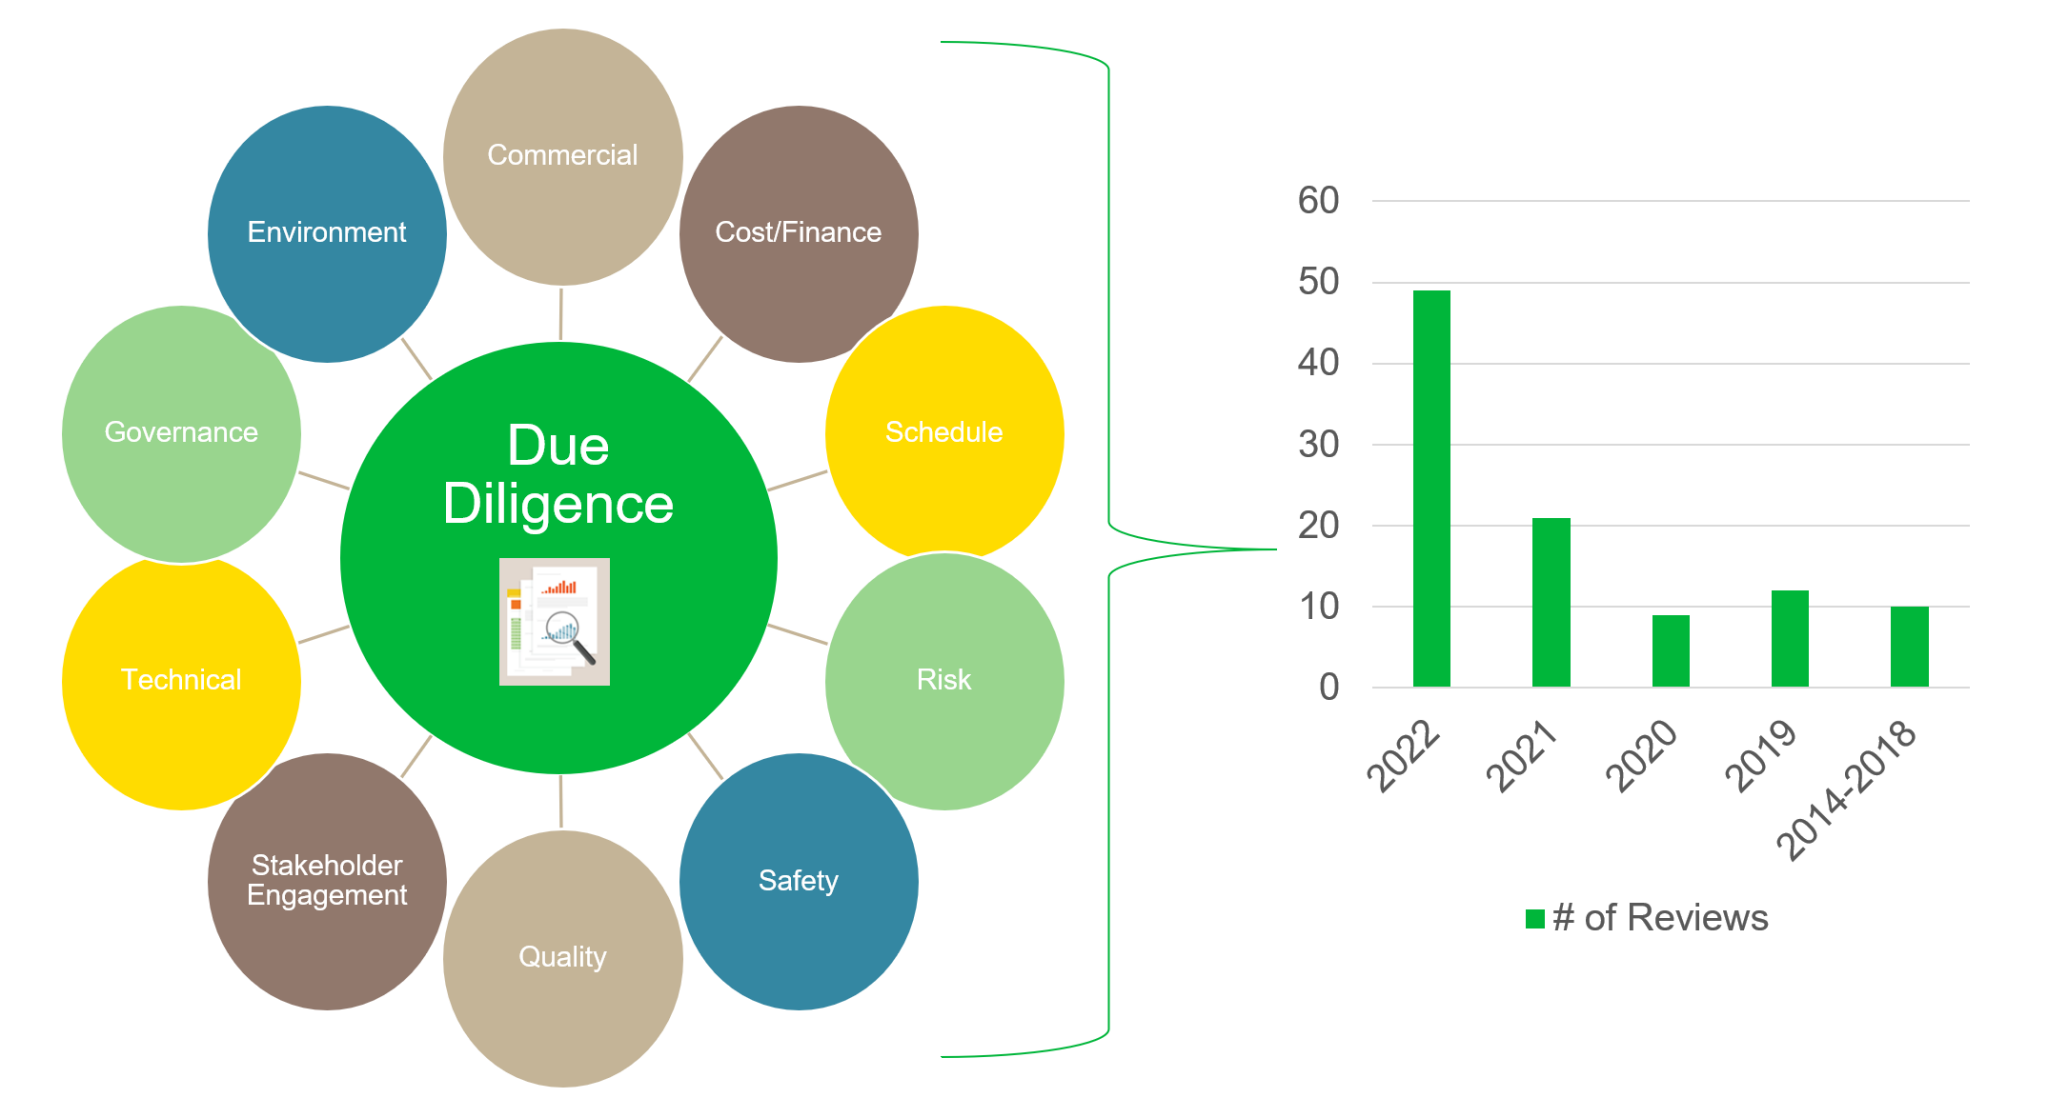 Due diligence reviews 